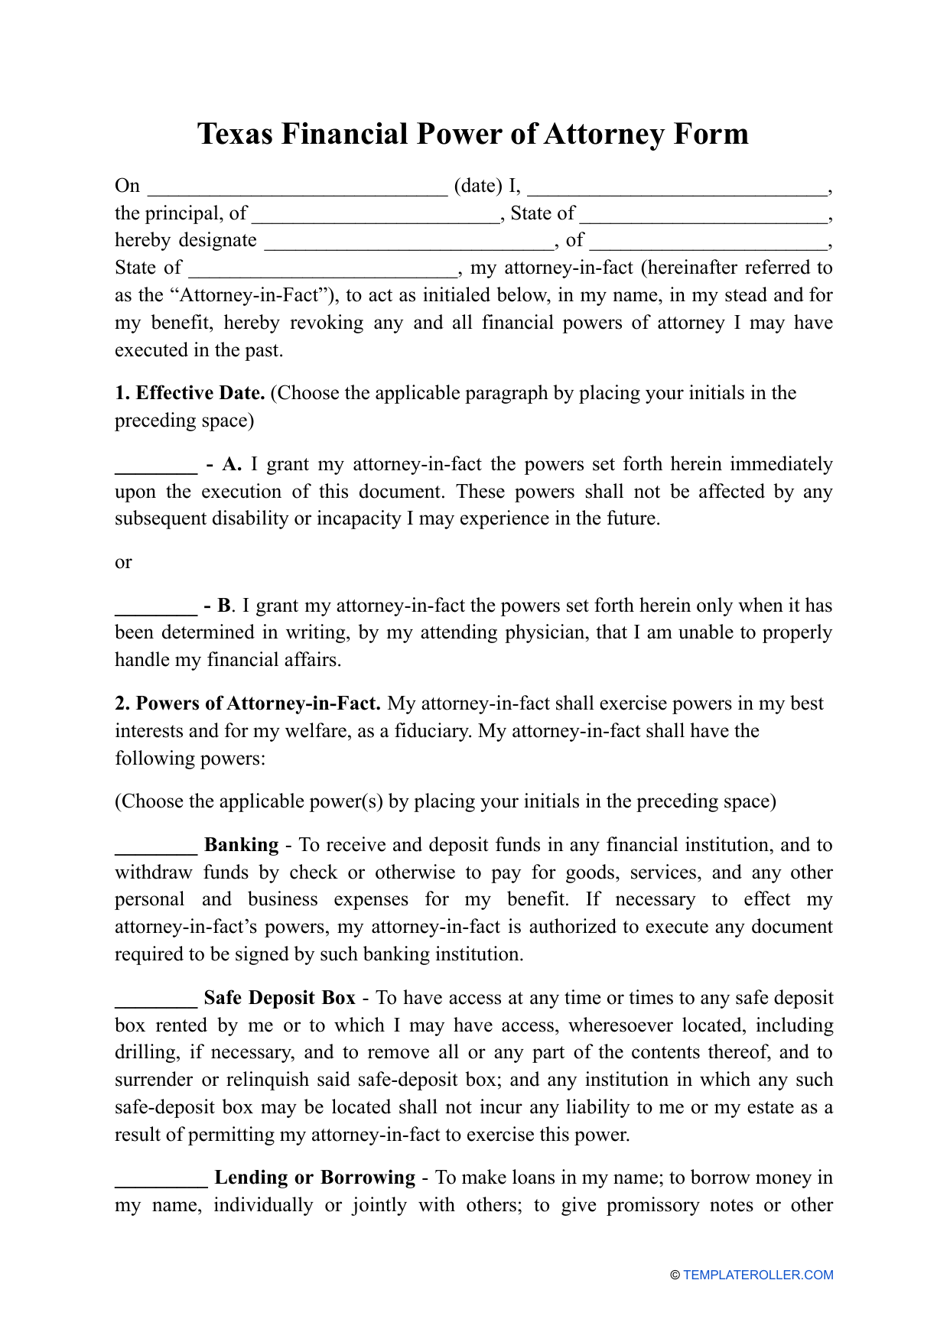 Financial Power of Attorney Form - Texas, Page 1